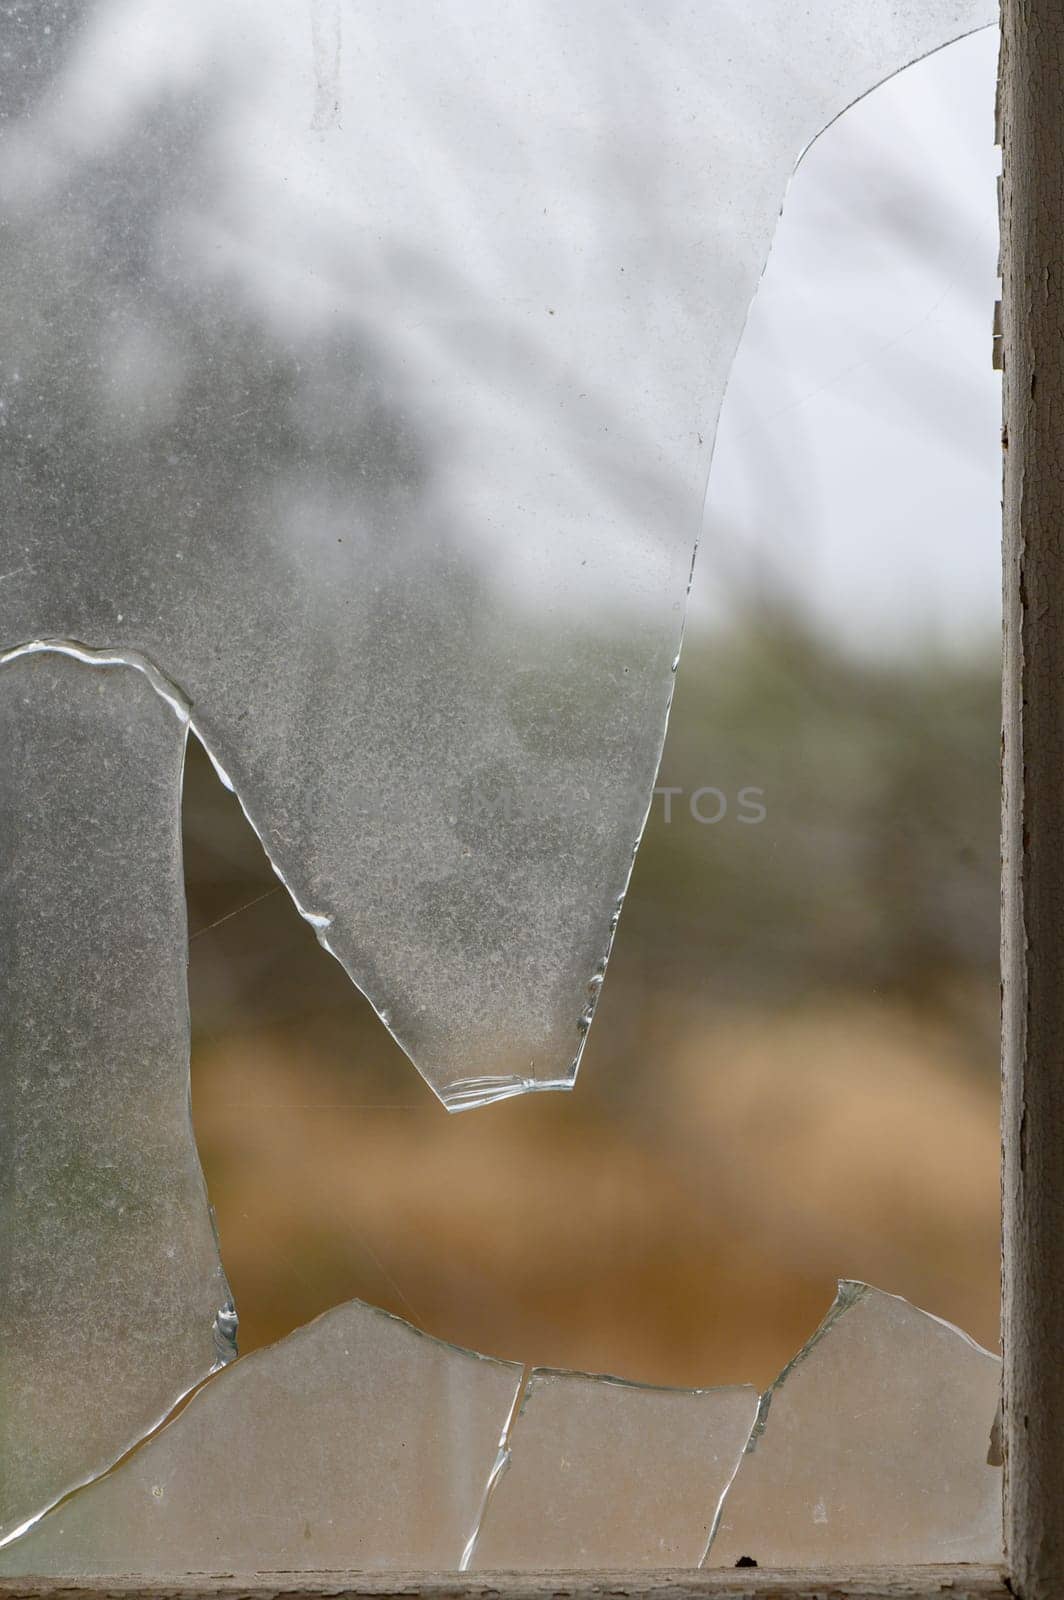 Glass broken by hooligans in a metal-plastic window, close-up. 1 by Mixa74